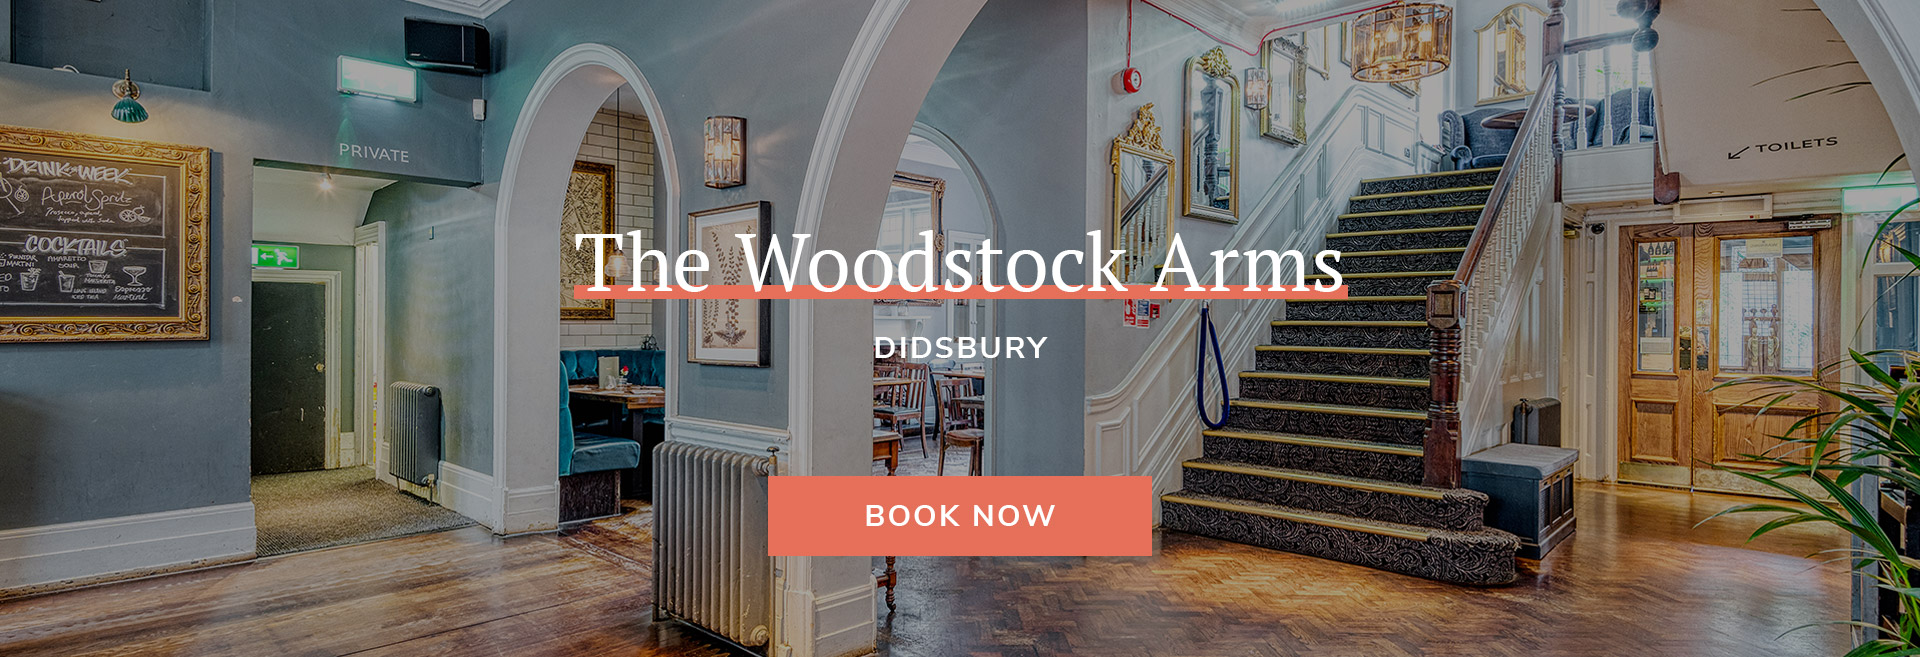 The Woodstock Arms Banner 3